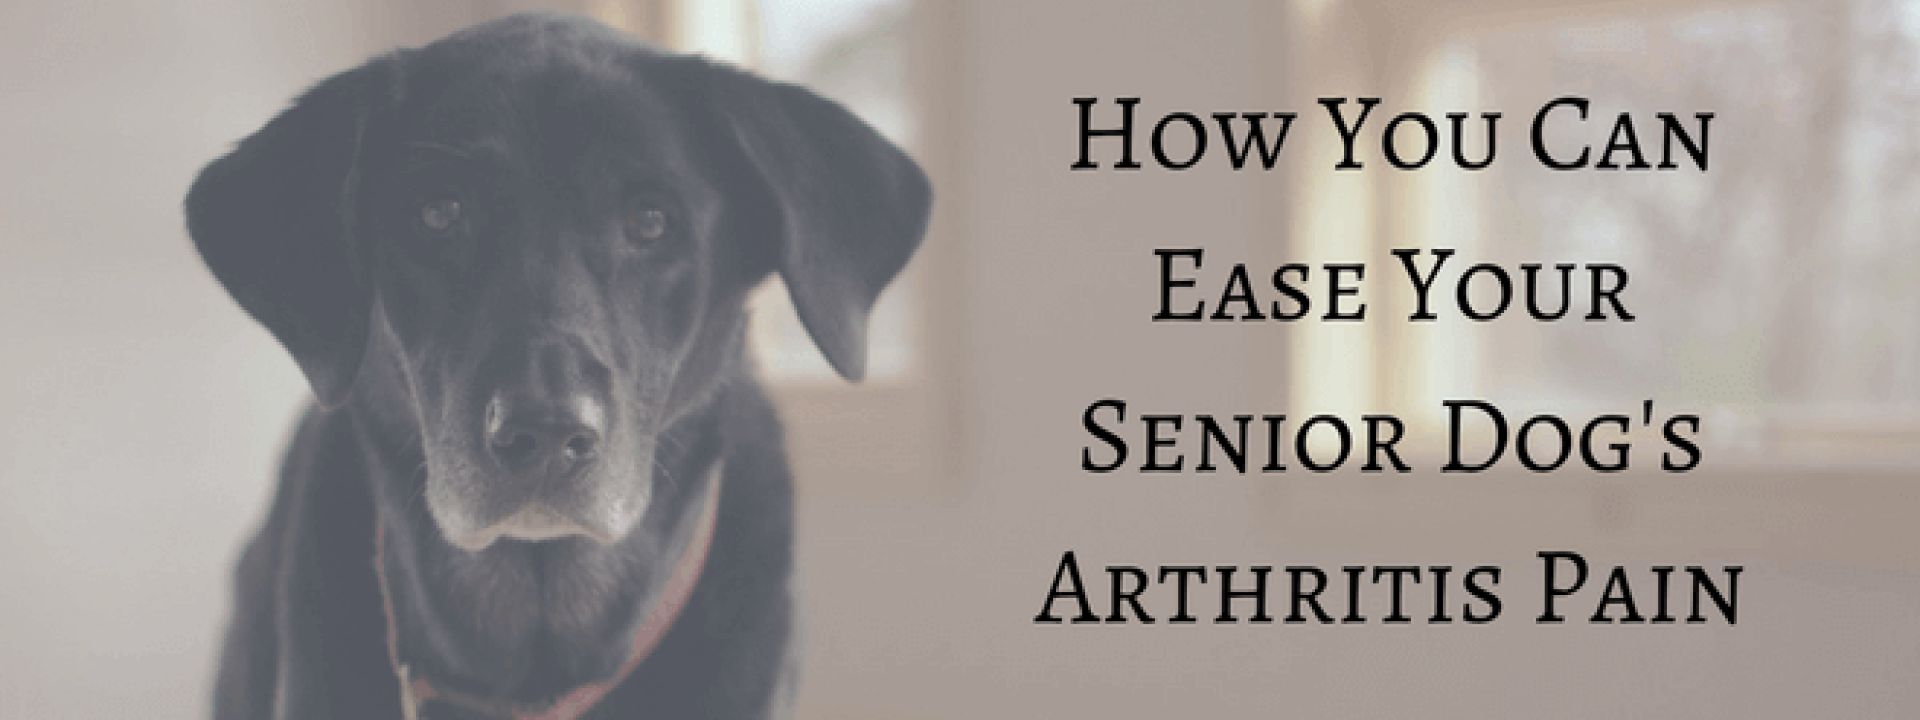 blog-title-how-you-can-ease-your-dogs-arthritis-pain.png